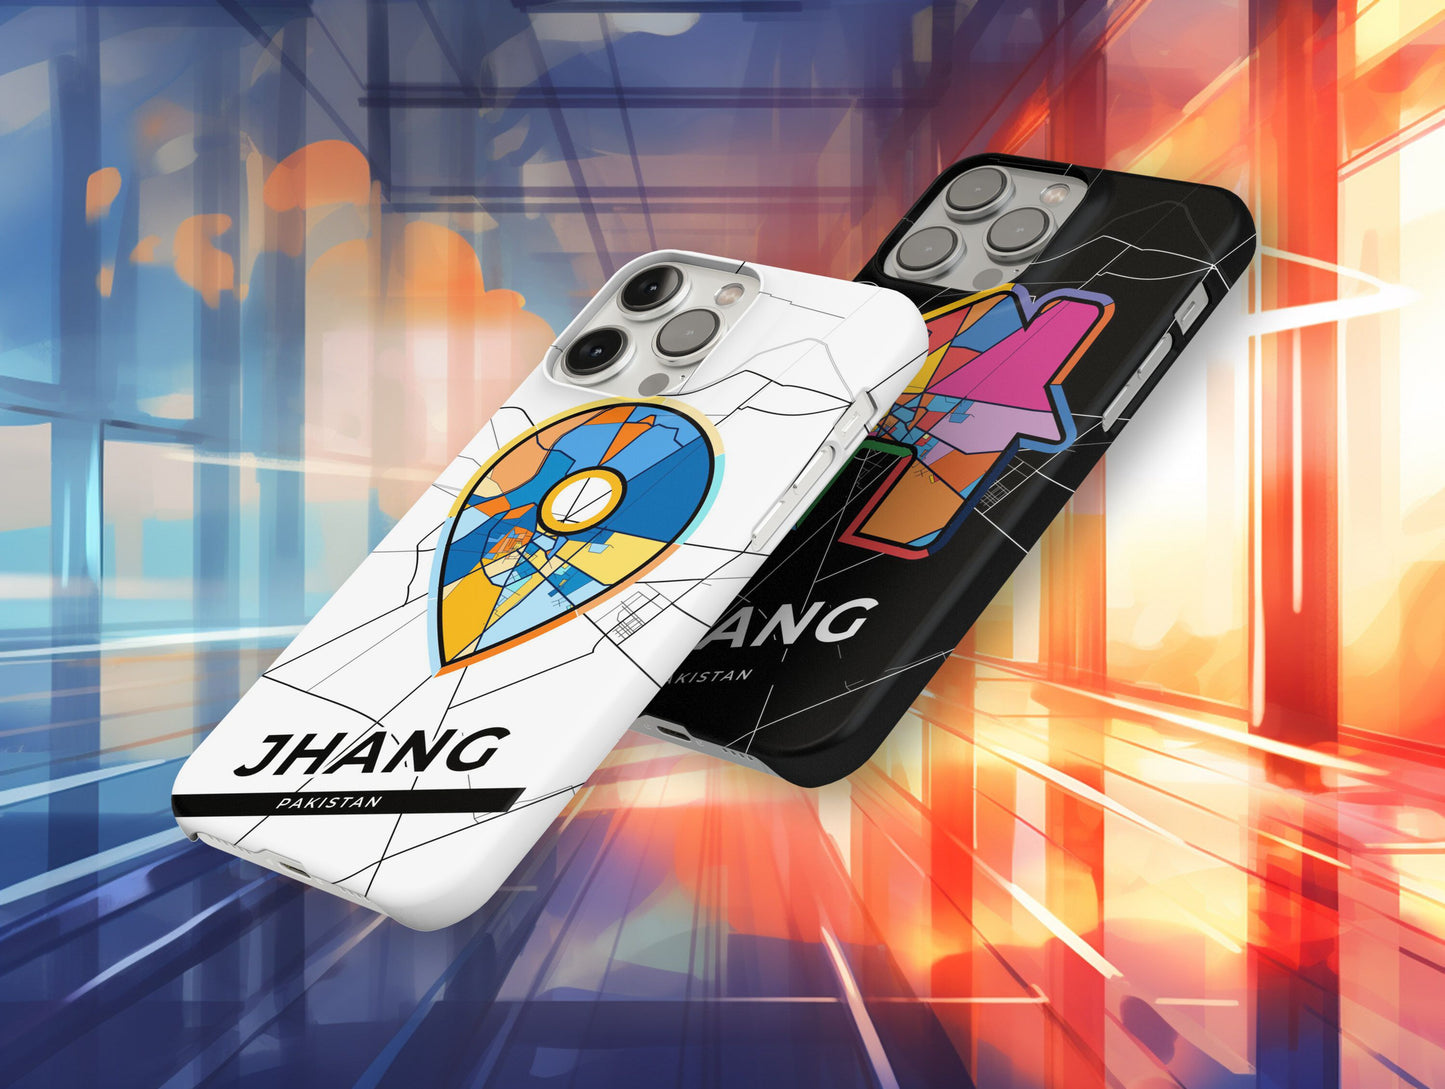 Jhang Pakistan slim phone case with colorful icon. Birthday, wedding or housewarming gift. Couple match cases.